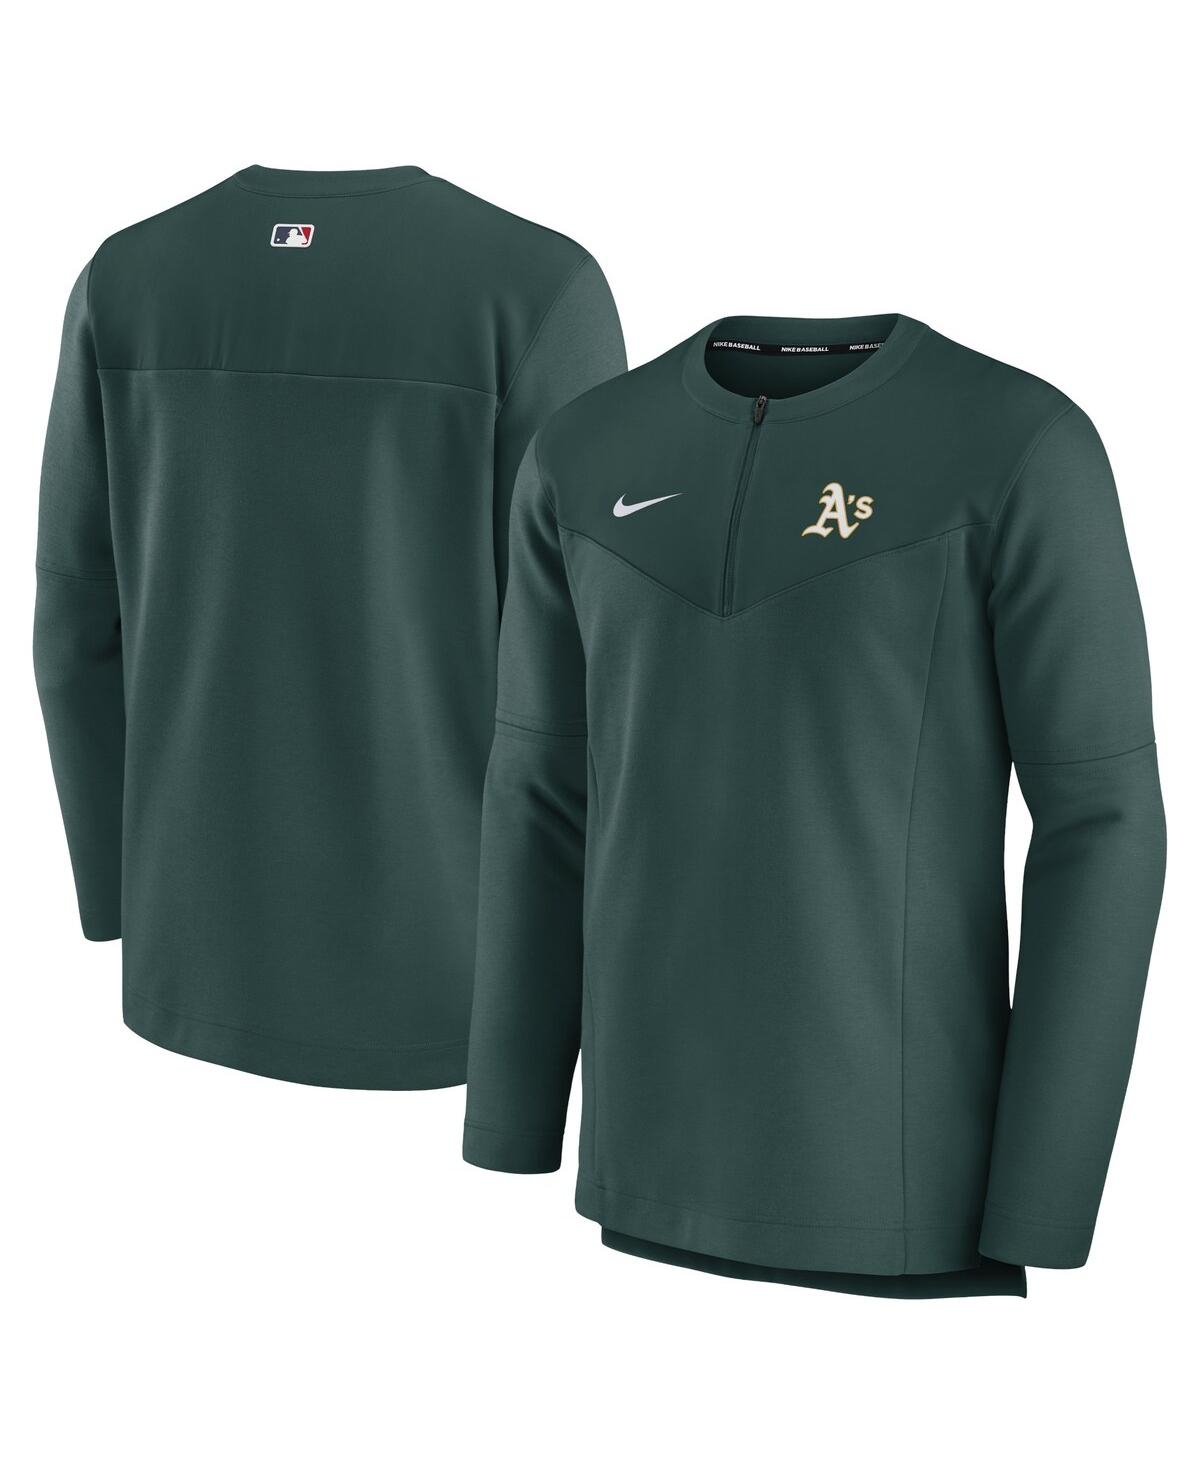 Nike Men's  Green Oakland Athletics Authentic Collection Game Time Performance Quarter-zip Top